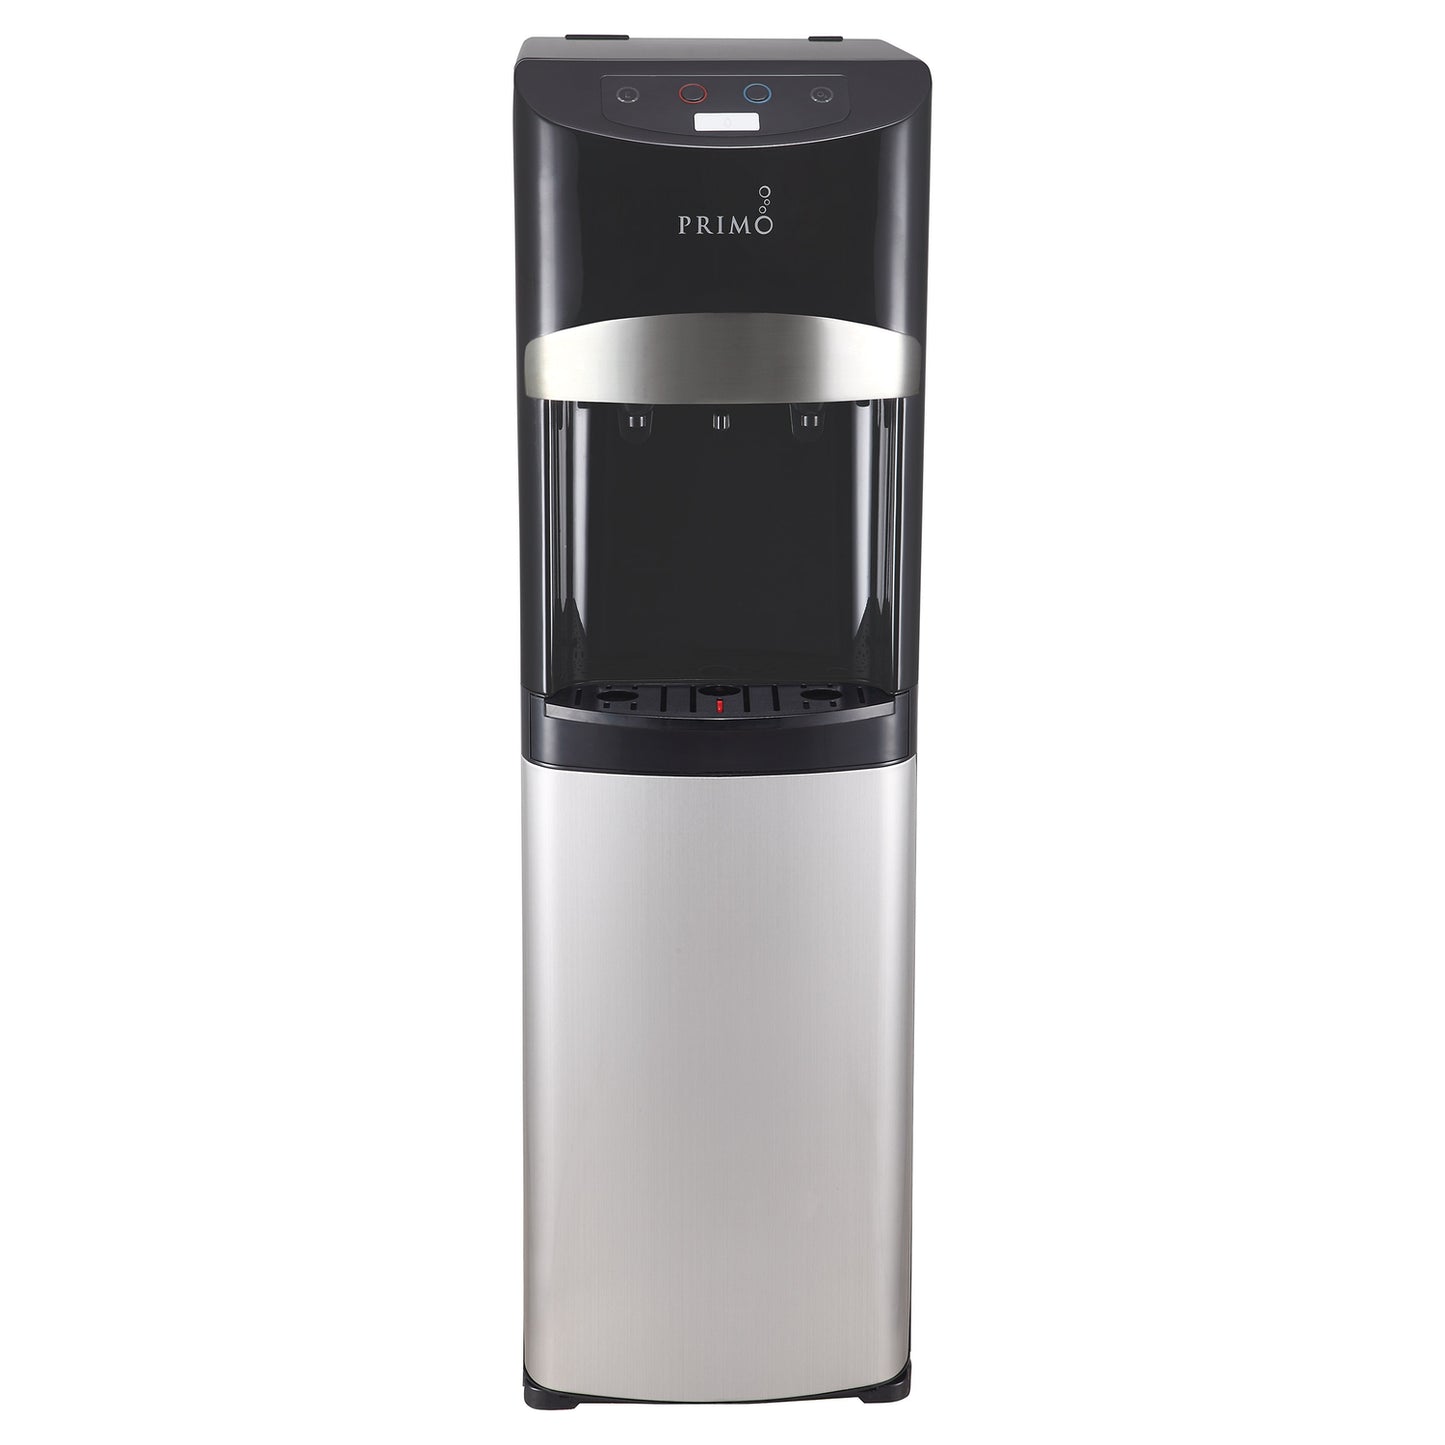 Black and Stainless Steel Bottom Load Water Cooler with Electronic Control